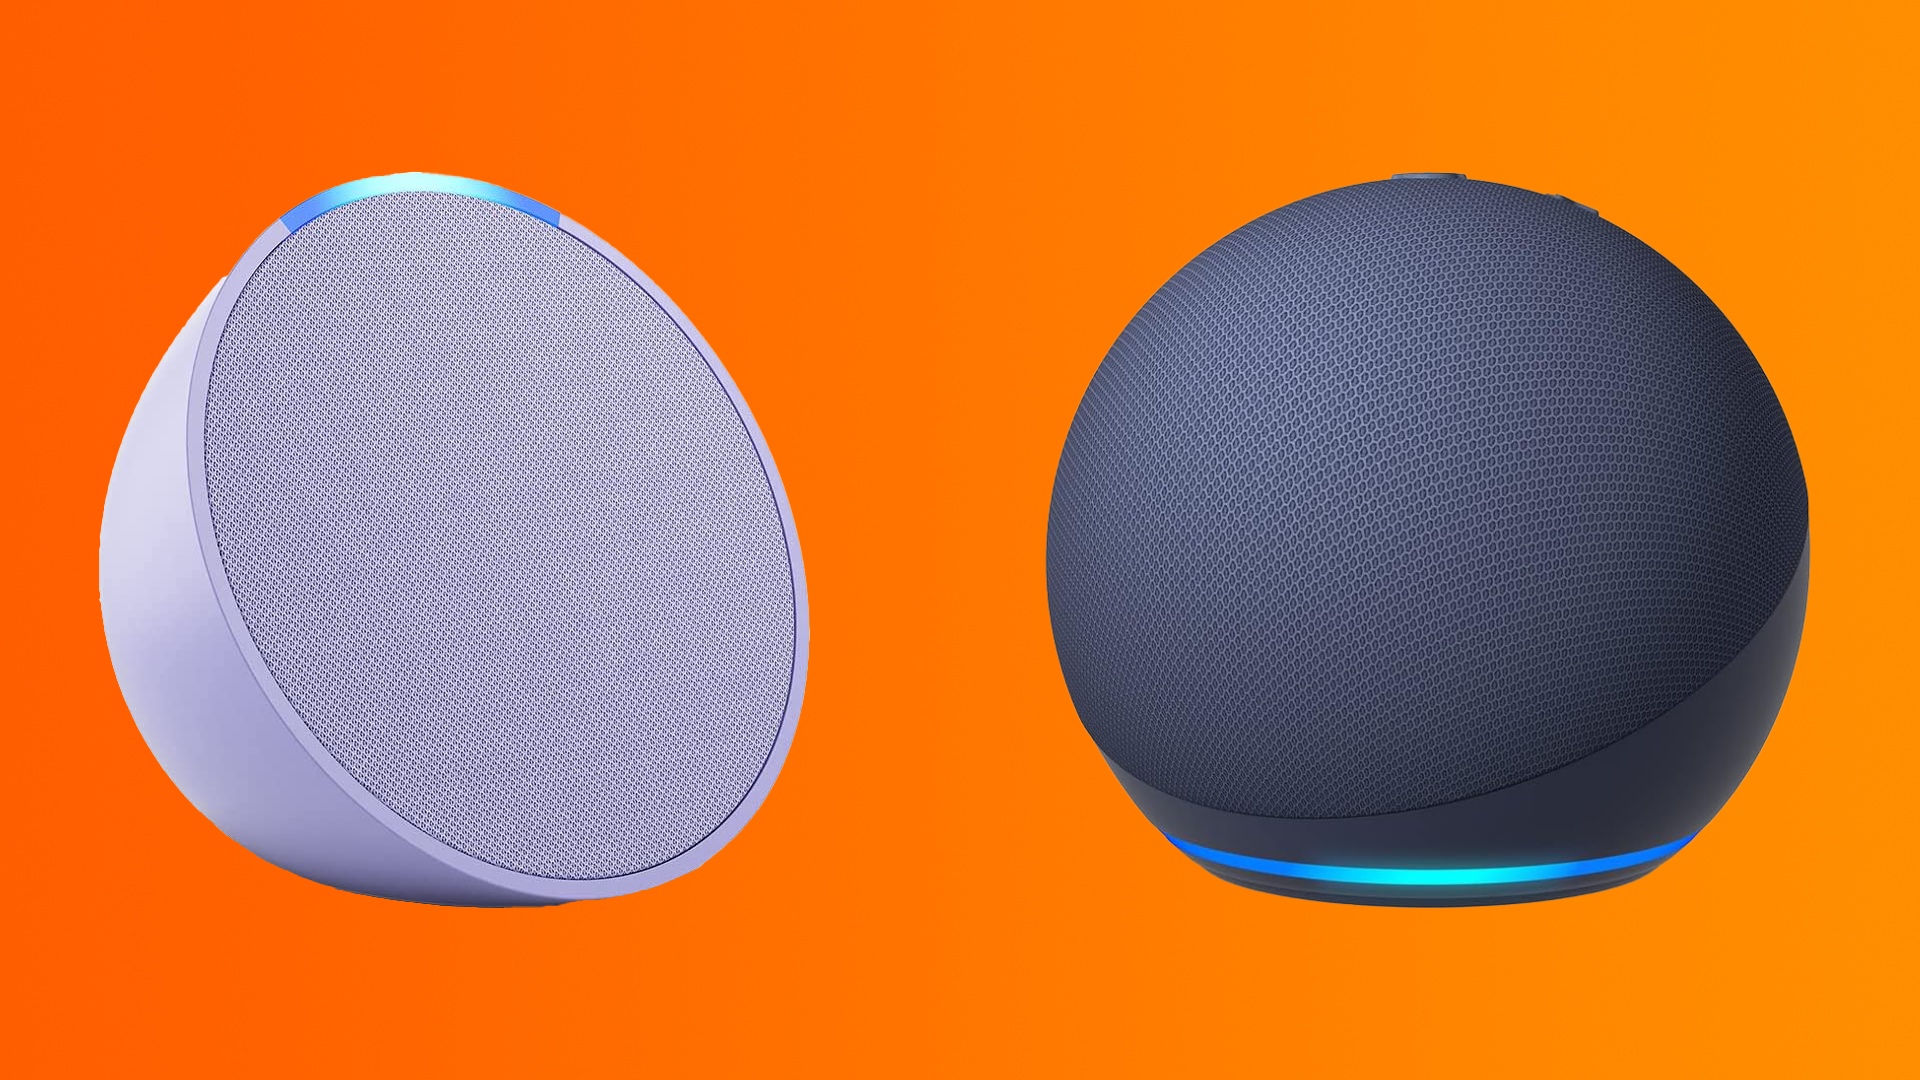 Echo Pop vs  Echo Dot: What's the difference?